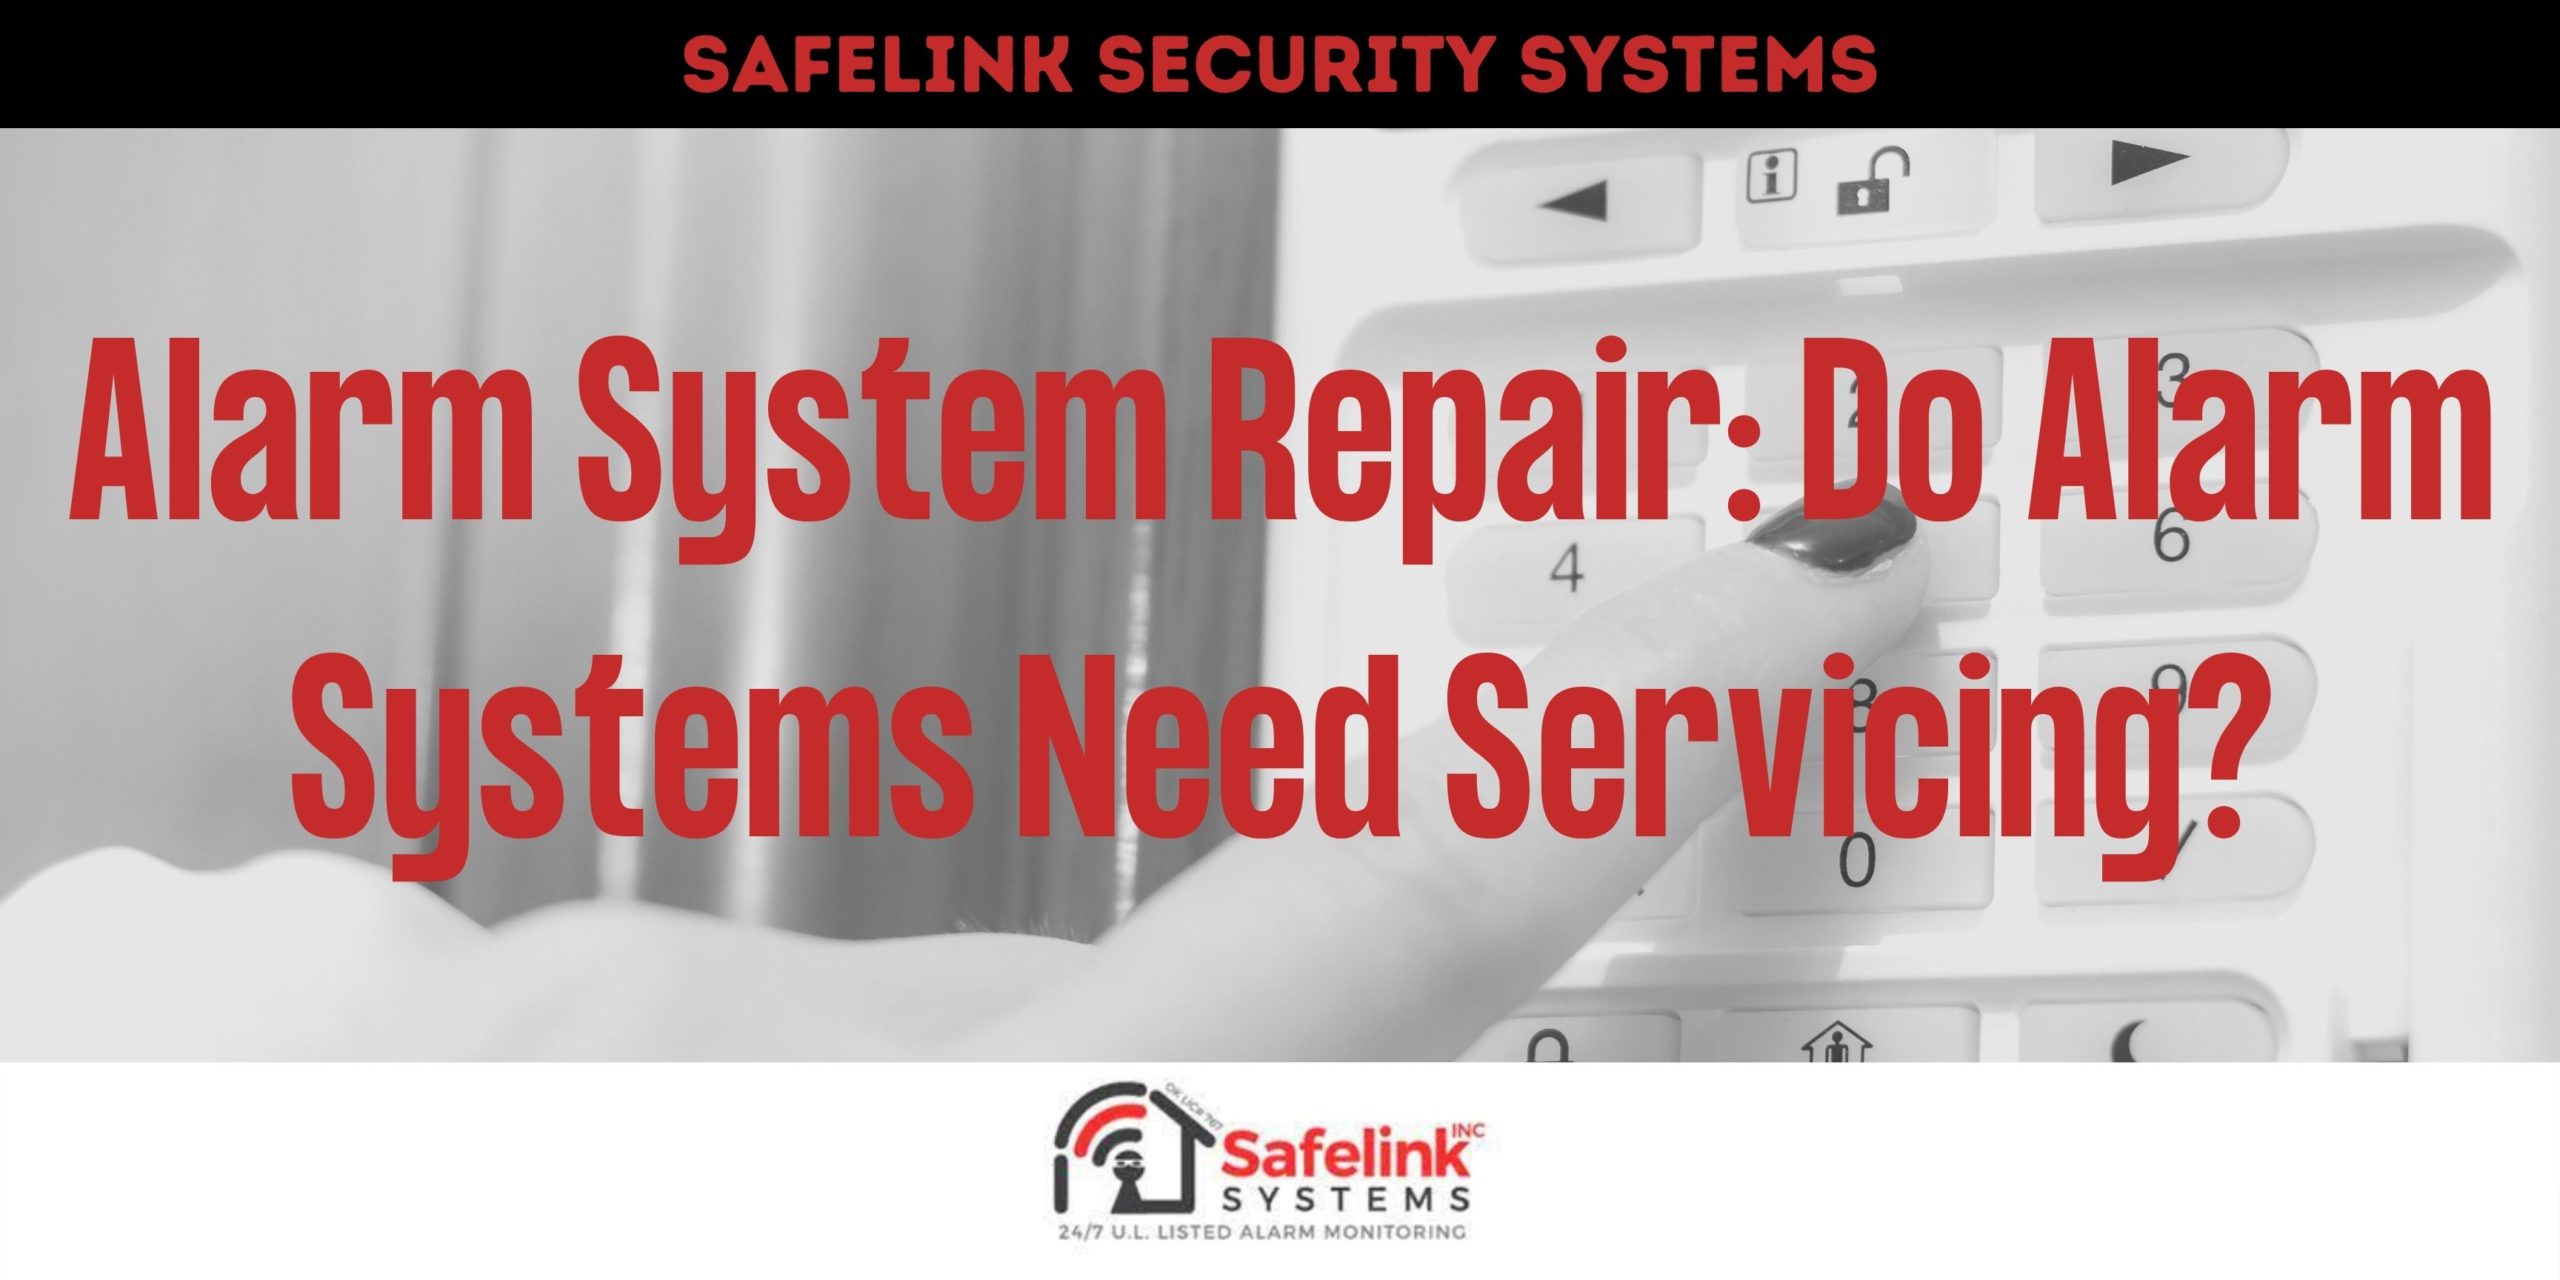 This is a cover photo for the blog Alarm System Repair: DO alarm Systems Need Servicing?